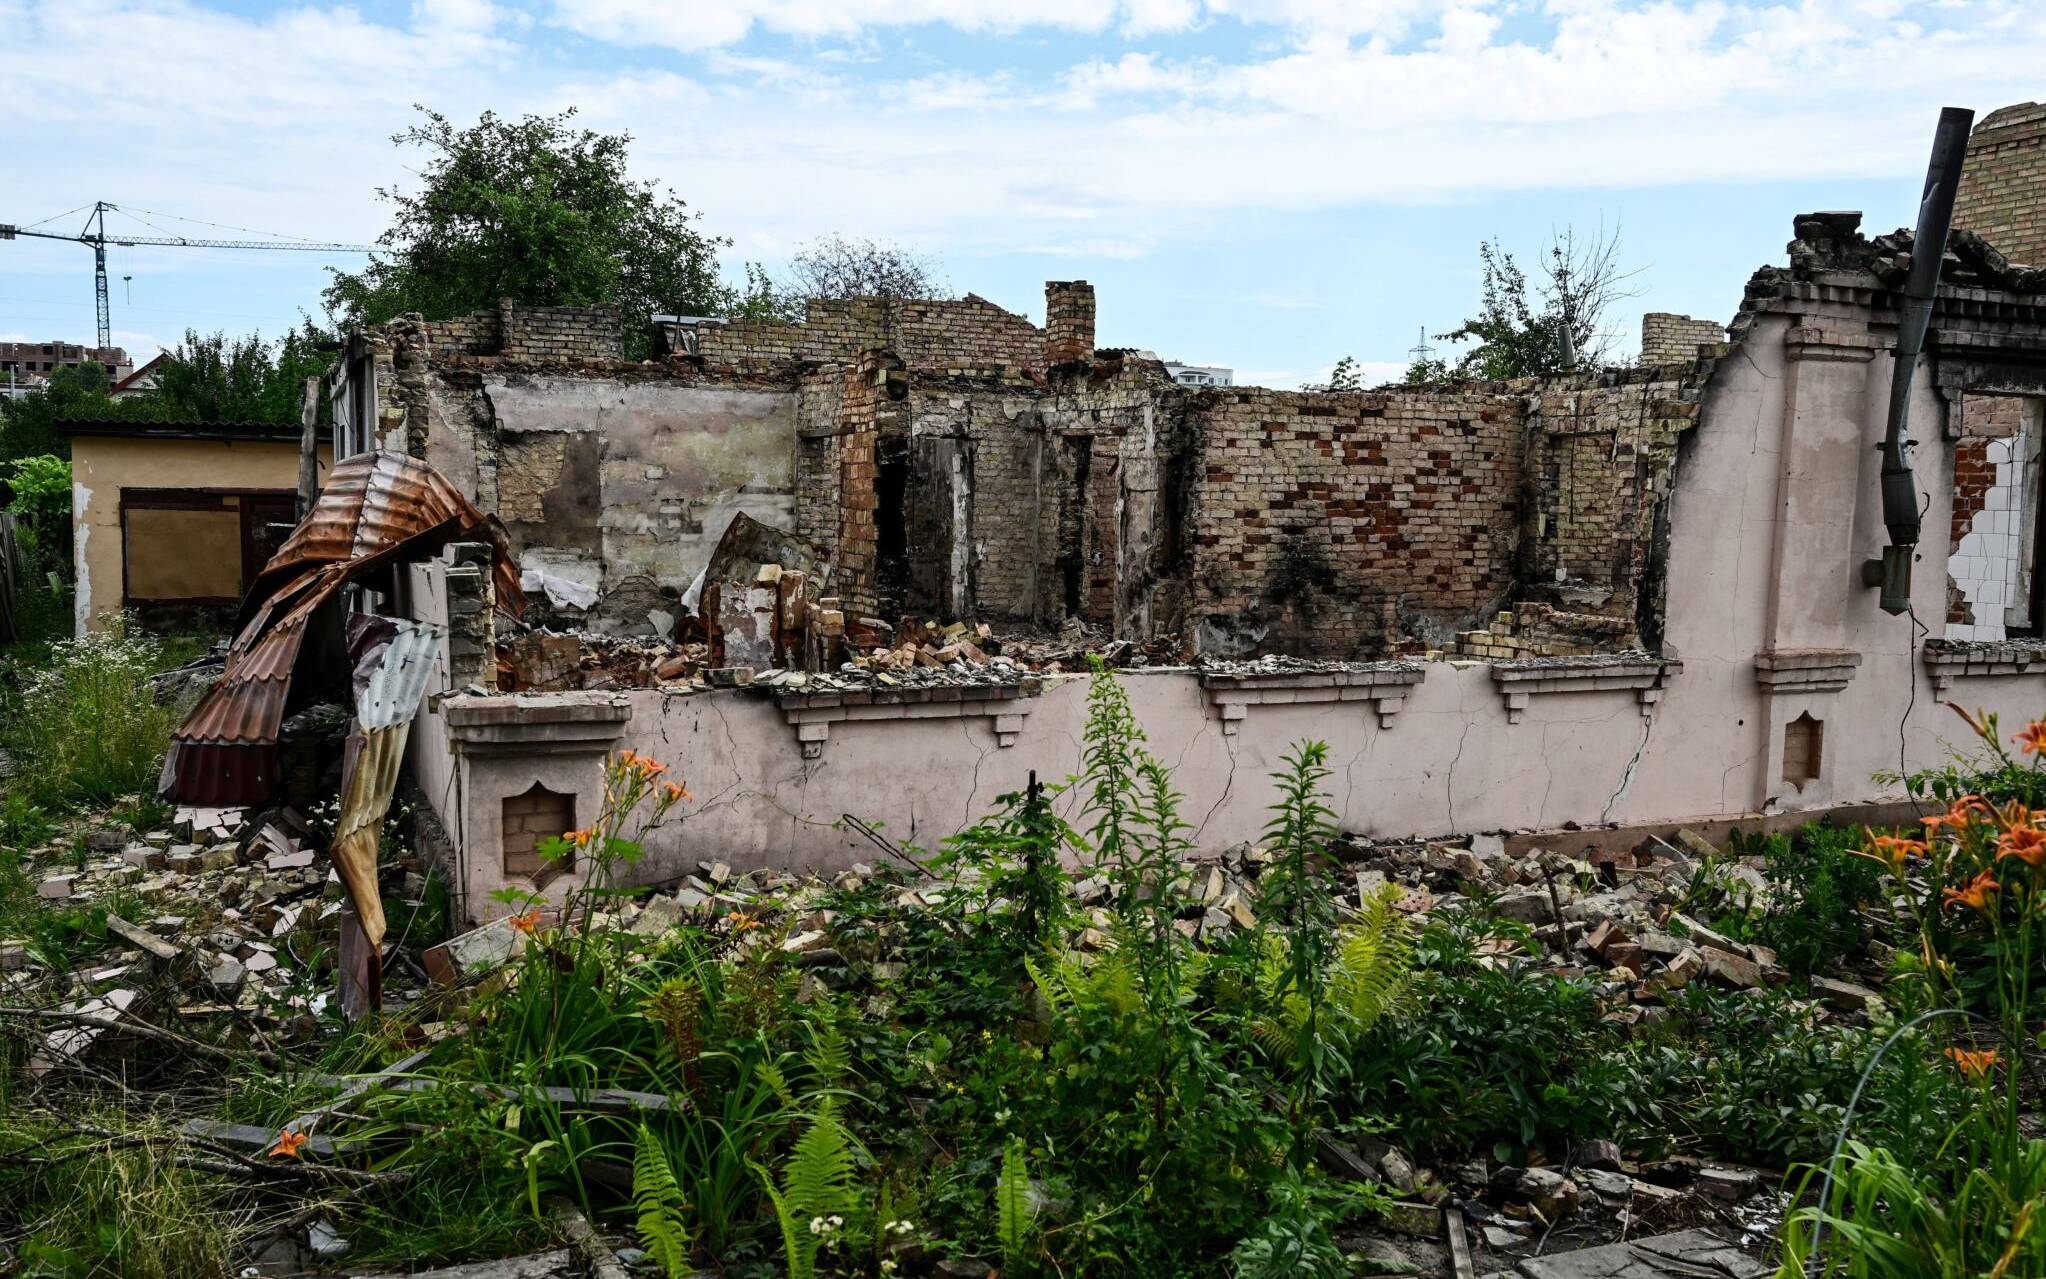 A picture taken on July 3, 2022 shows destroyed buildings in a residential area near Irpin, on Vokzalnaya street, which links the Ukrainian cities of Bucha and Irpin, amid the Russian invasion of Ukraine. - Three months have passed since AFP journalists discovered, on April 2, in Yablunska Street, 20 bodies of slaughtered civilians, the first indications of the atrocities and destruction committed during the Russian occupation of these suburbs of northwestern Kiev, once prized for their calm and proximity to nature. (Photo by Miguel MEDINA / AFP)